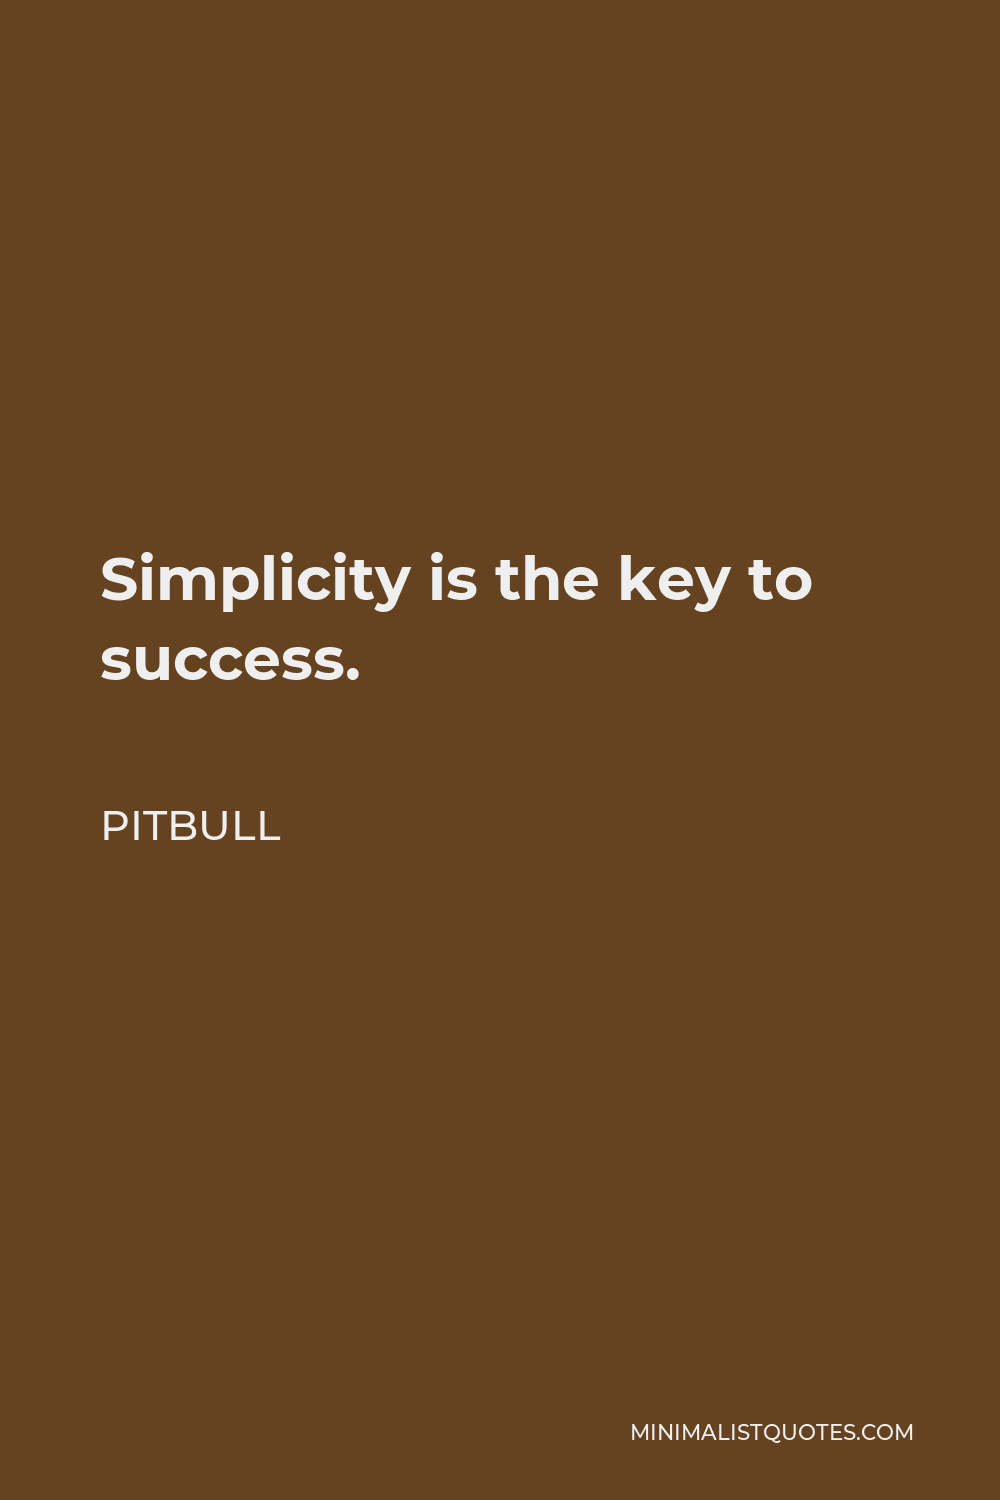 Pitbull Quote - Simplicity is the key to success.